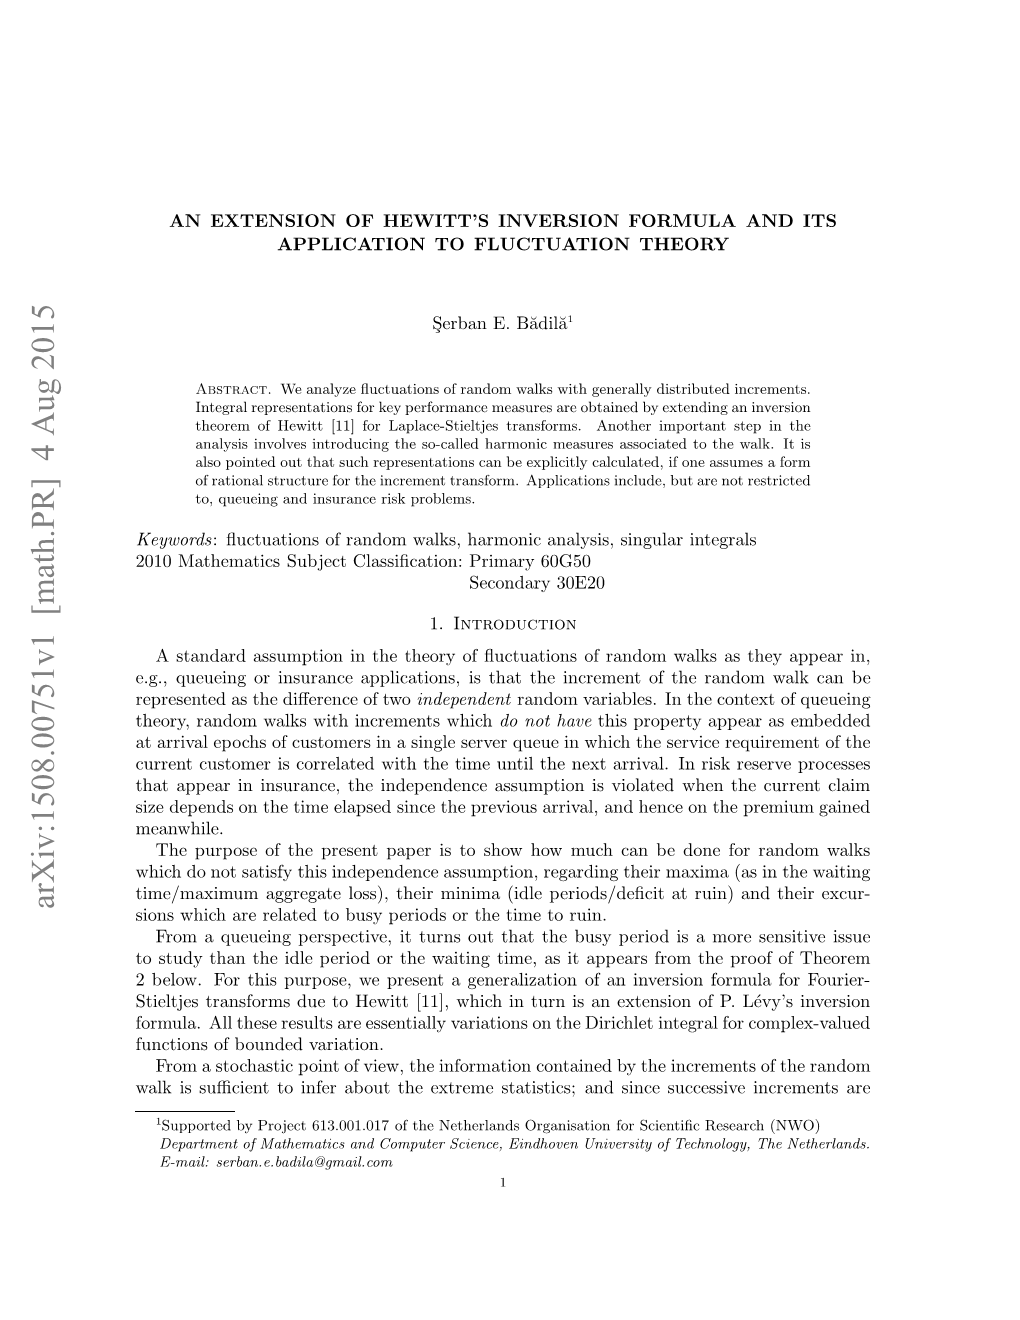 An Extension of Hewitt's Inversion Formula and Its Application to Fluctuation Theory